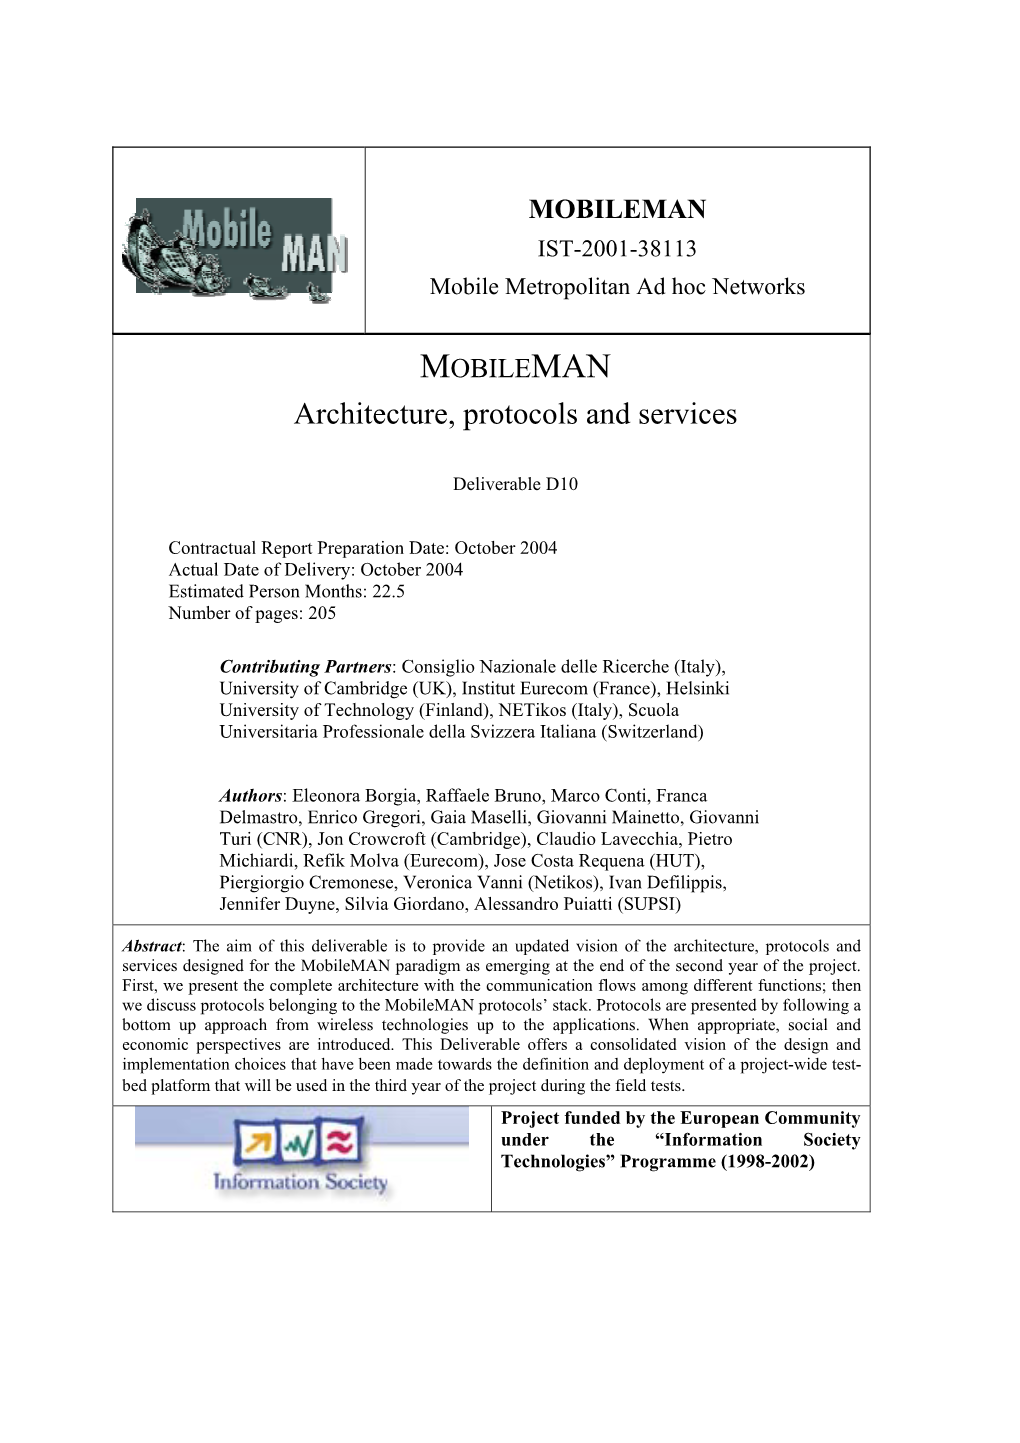 Mobileman Architecture, Protocols, and Services